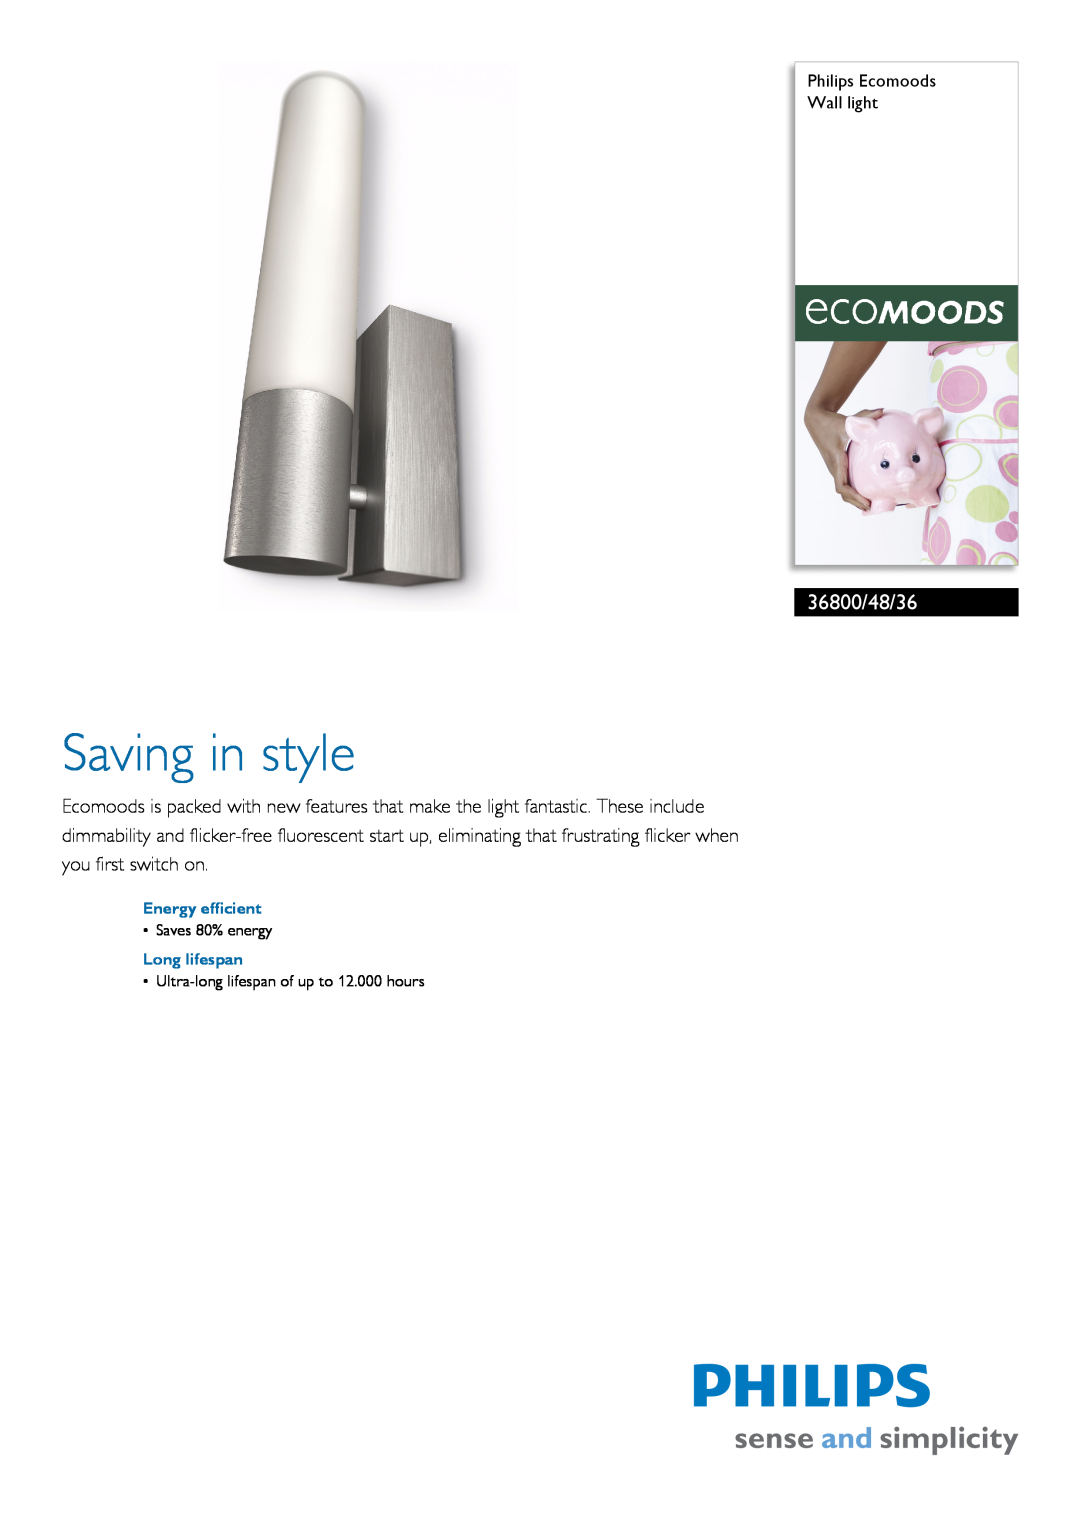 Philips 36800/48/36 manual Philips Ecomoods Wall light, Energy efficient, Long lifespan, Saving in style, Saves 80% energy 